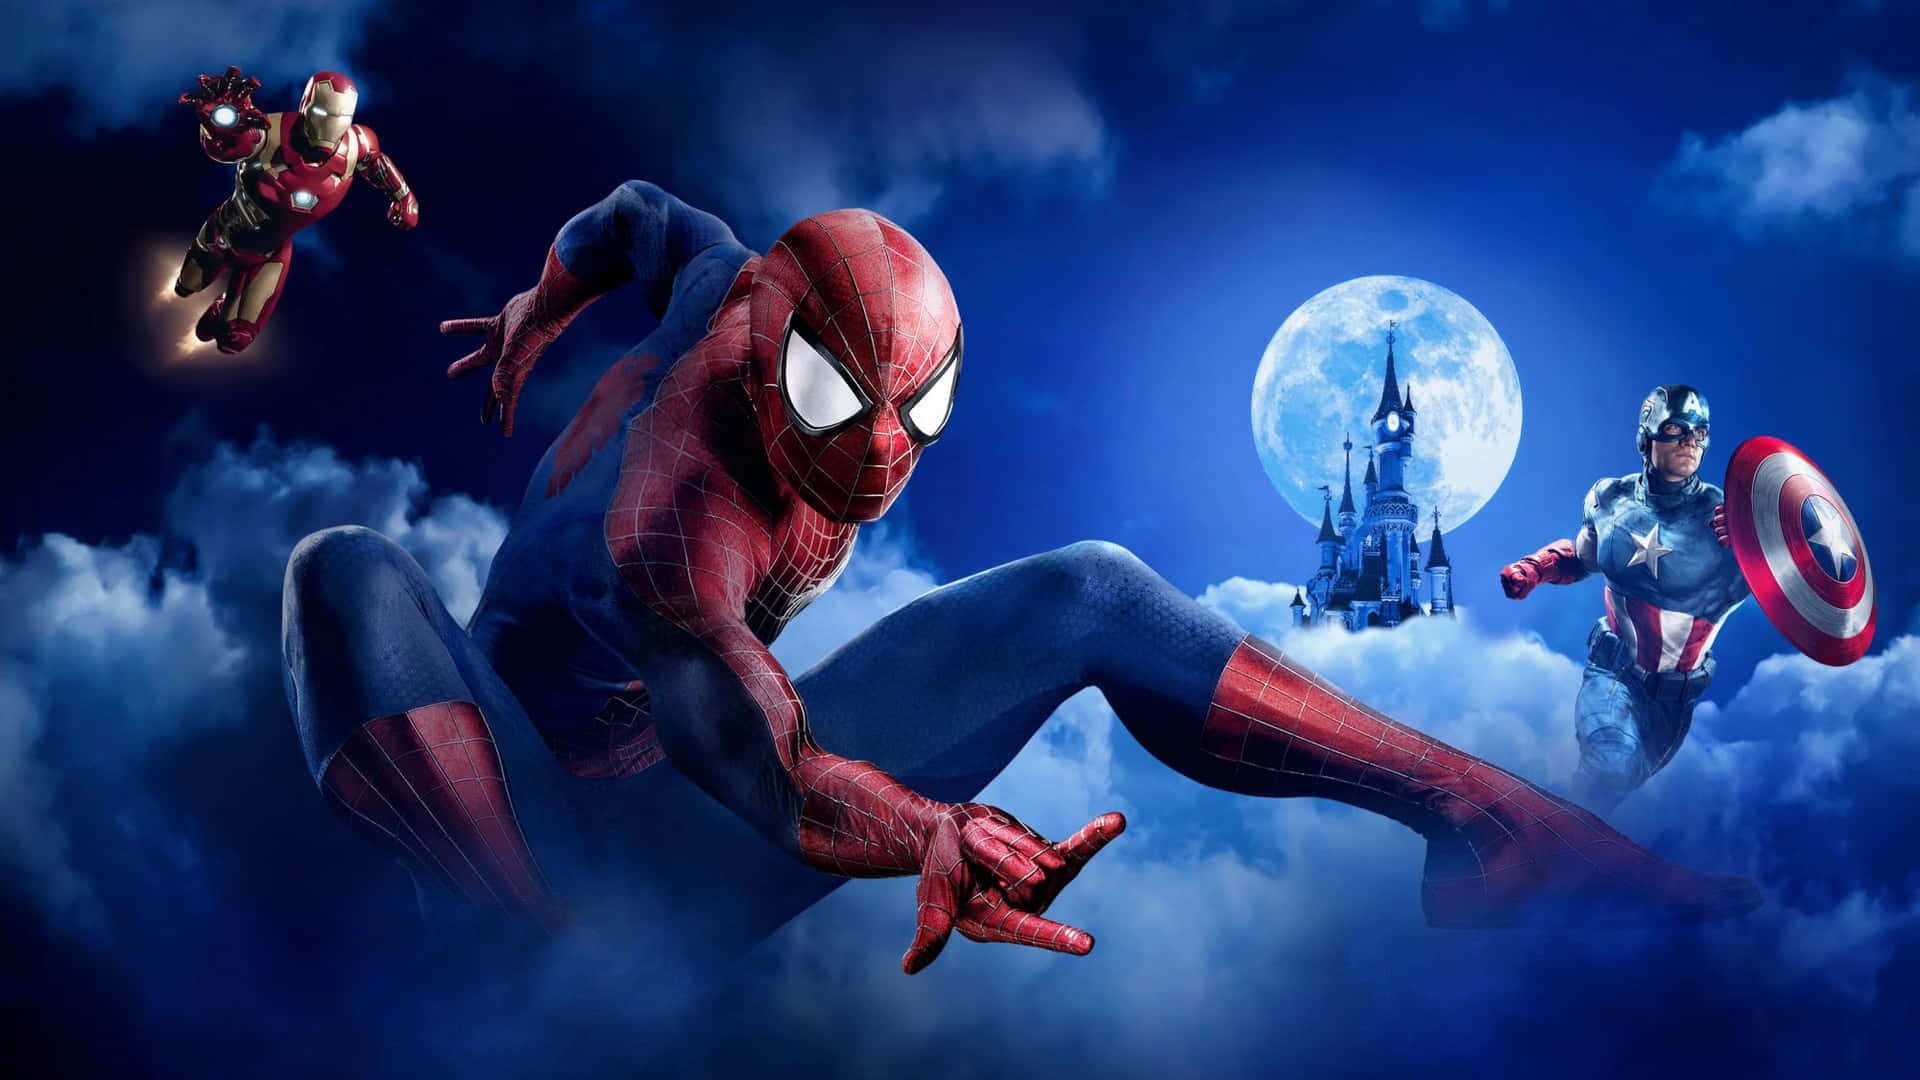 A Spider - Man And His Friends Flying In The Sky Wallpaper